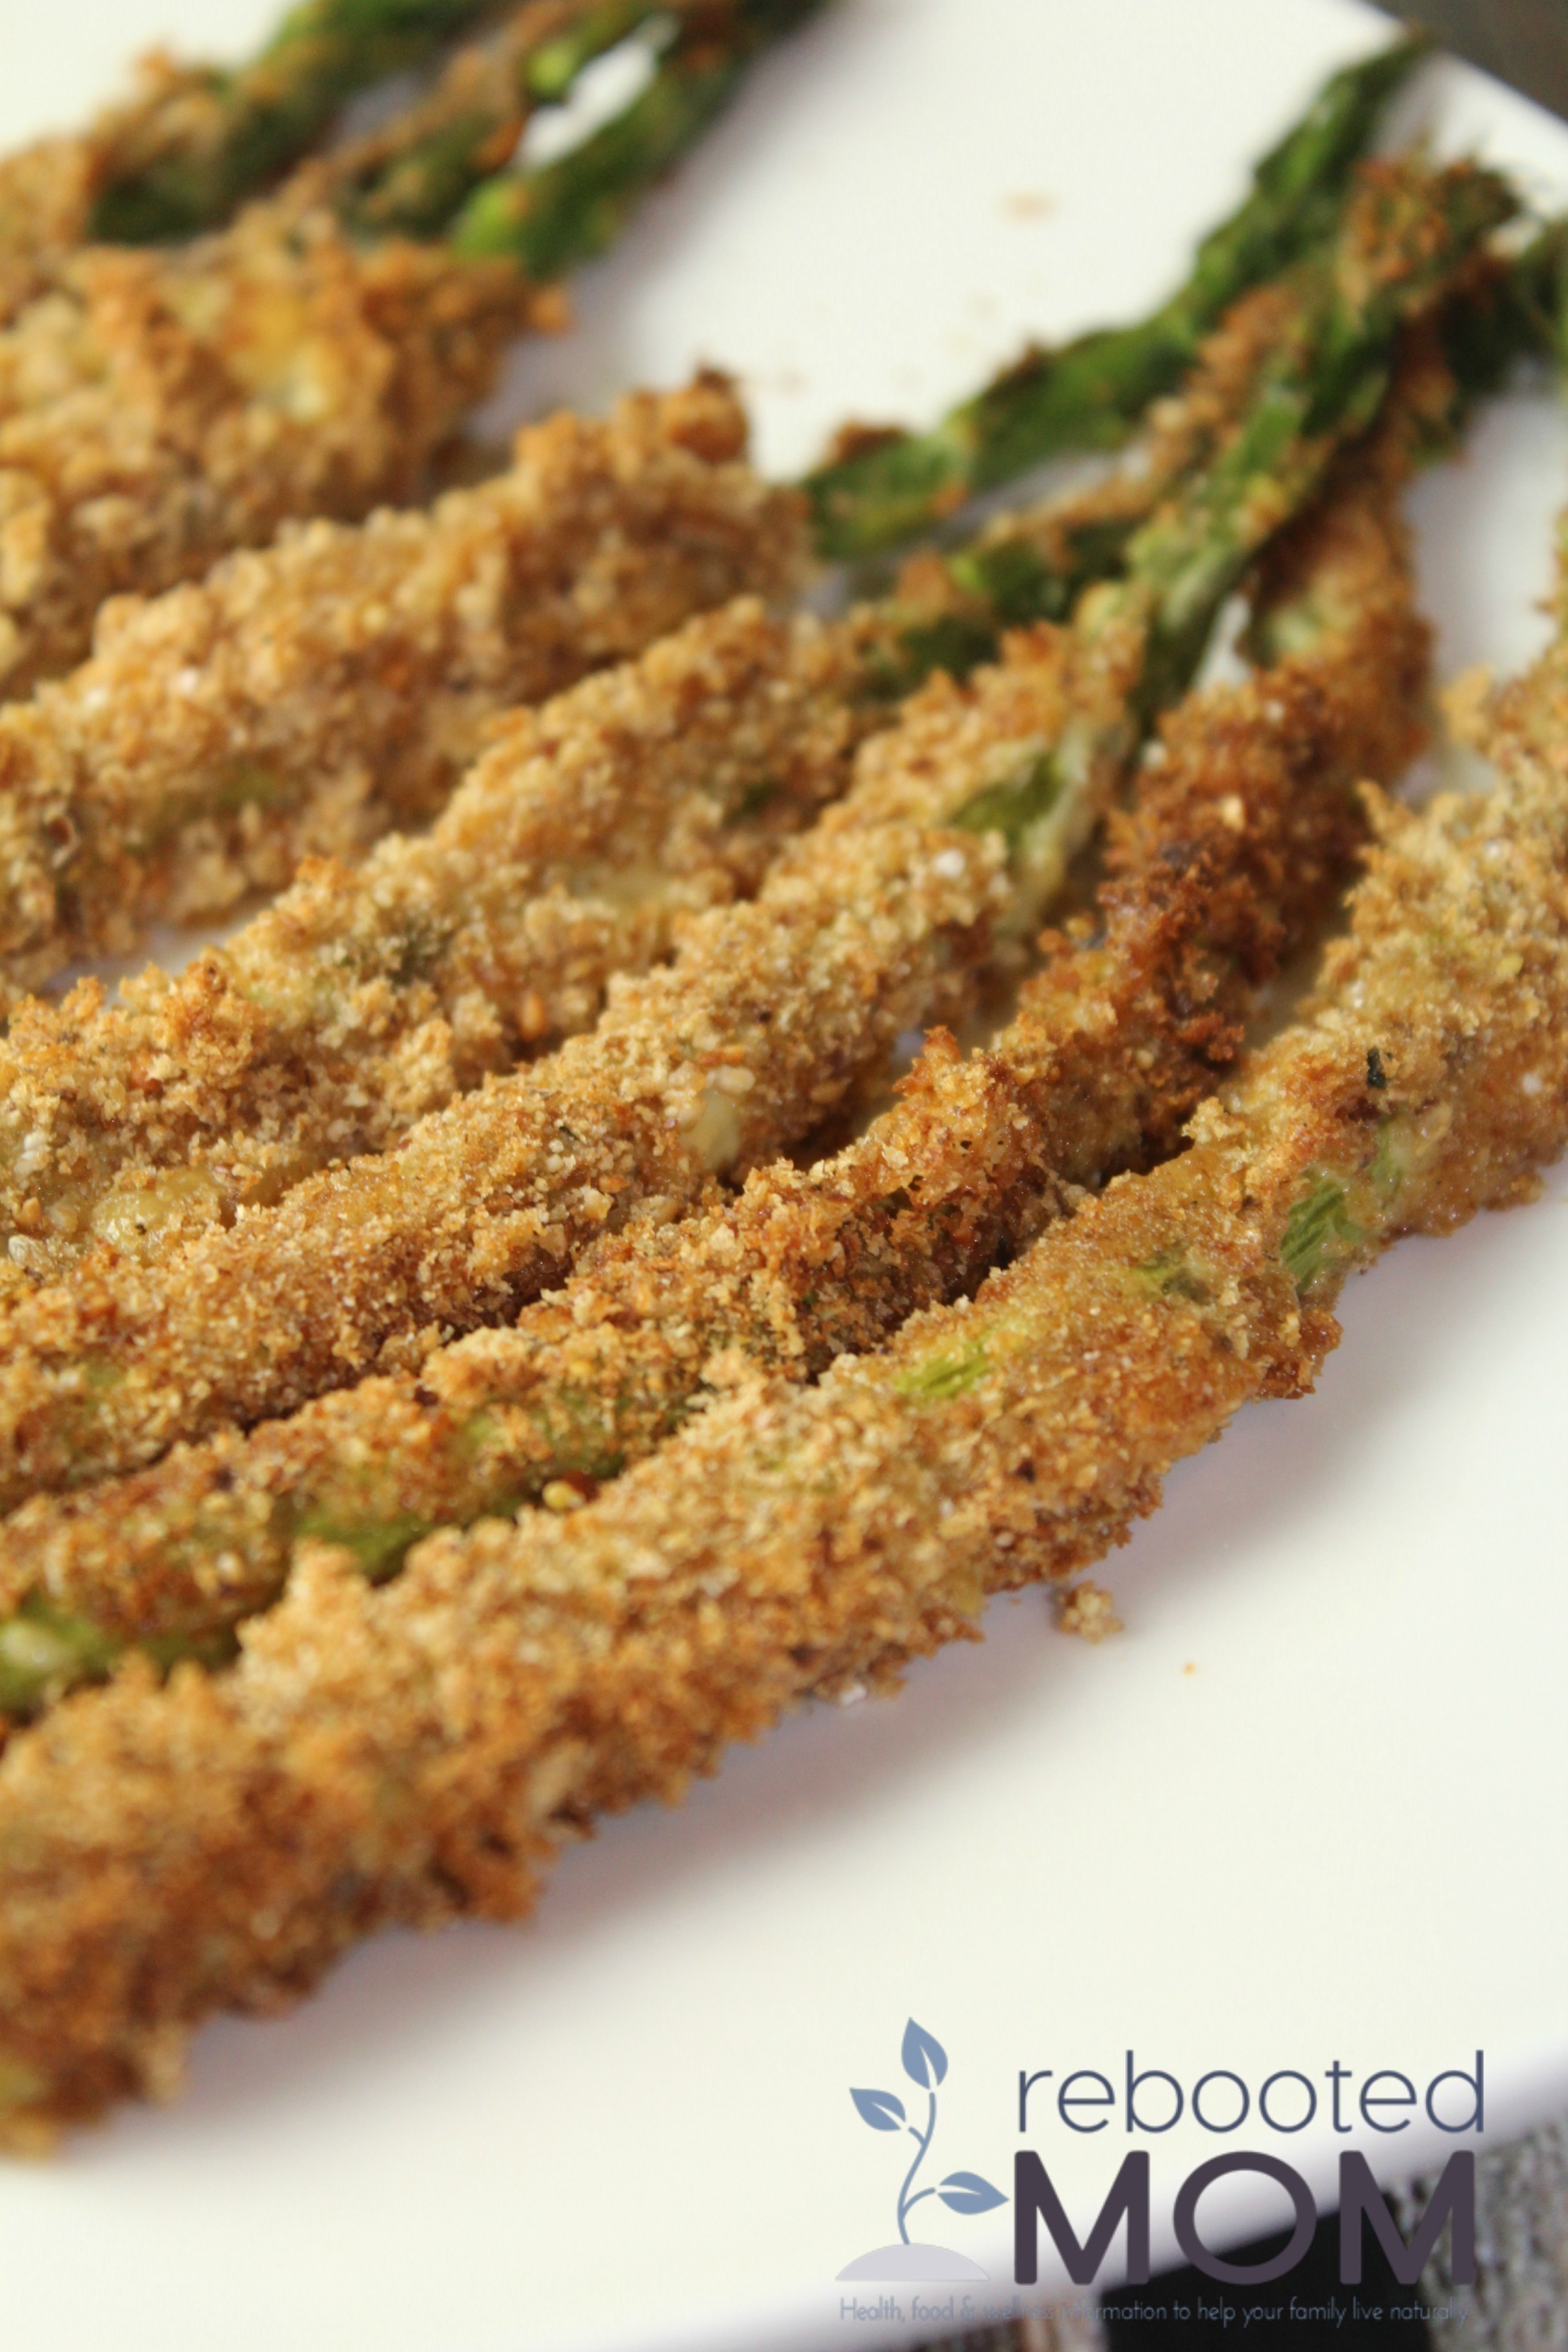 Panko roasted asparagus are fresh asparagus spears coasted in a mixture of grated parmesan and breadcrumbs and baked until they are crispy, golden brown.